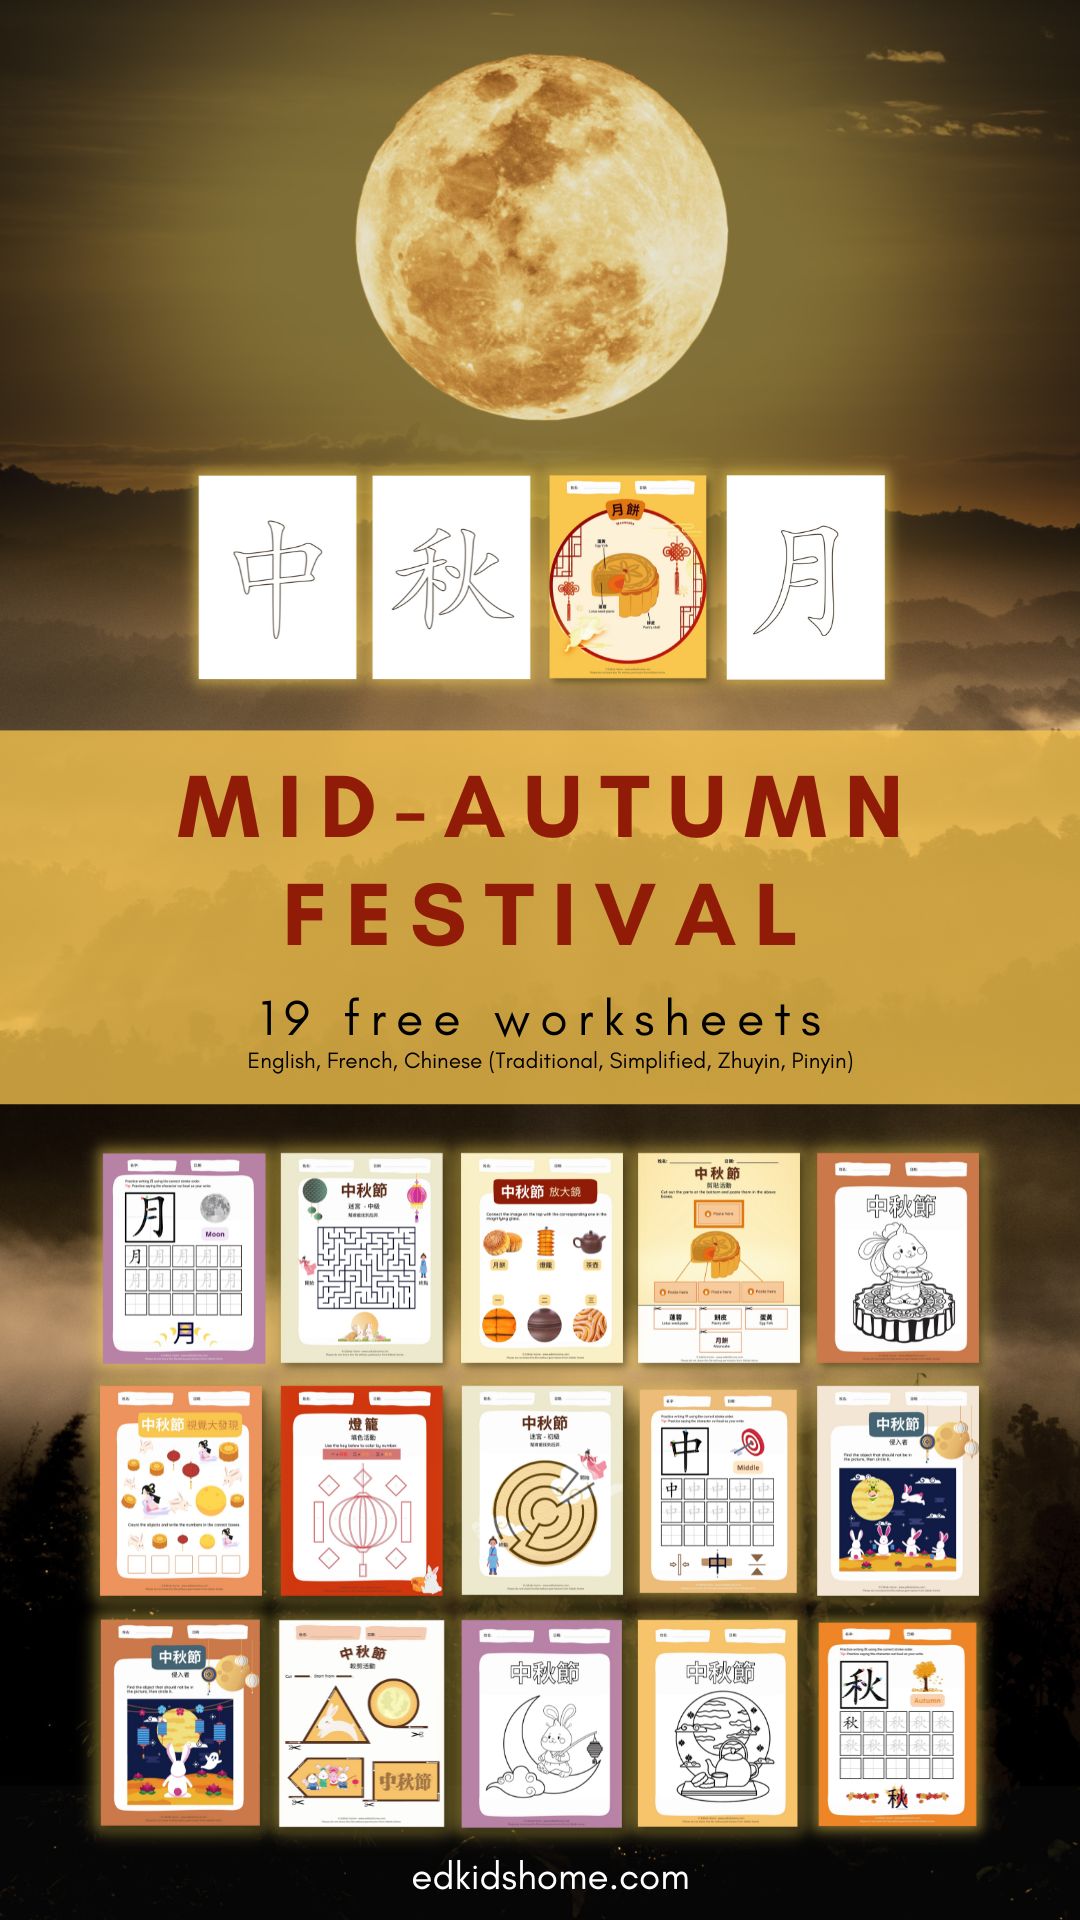 19 free Mid-Autumn worksheets available in English, French, Chinese (Traditional, Simplified Zhuyin, Pinyin)